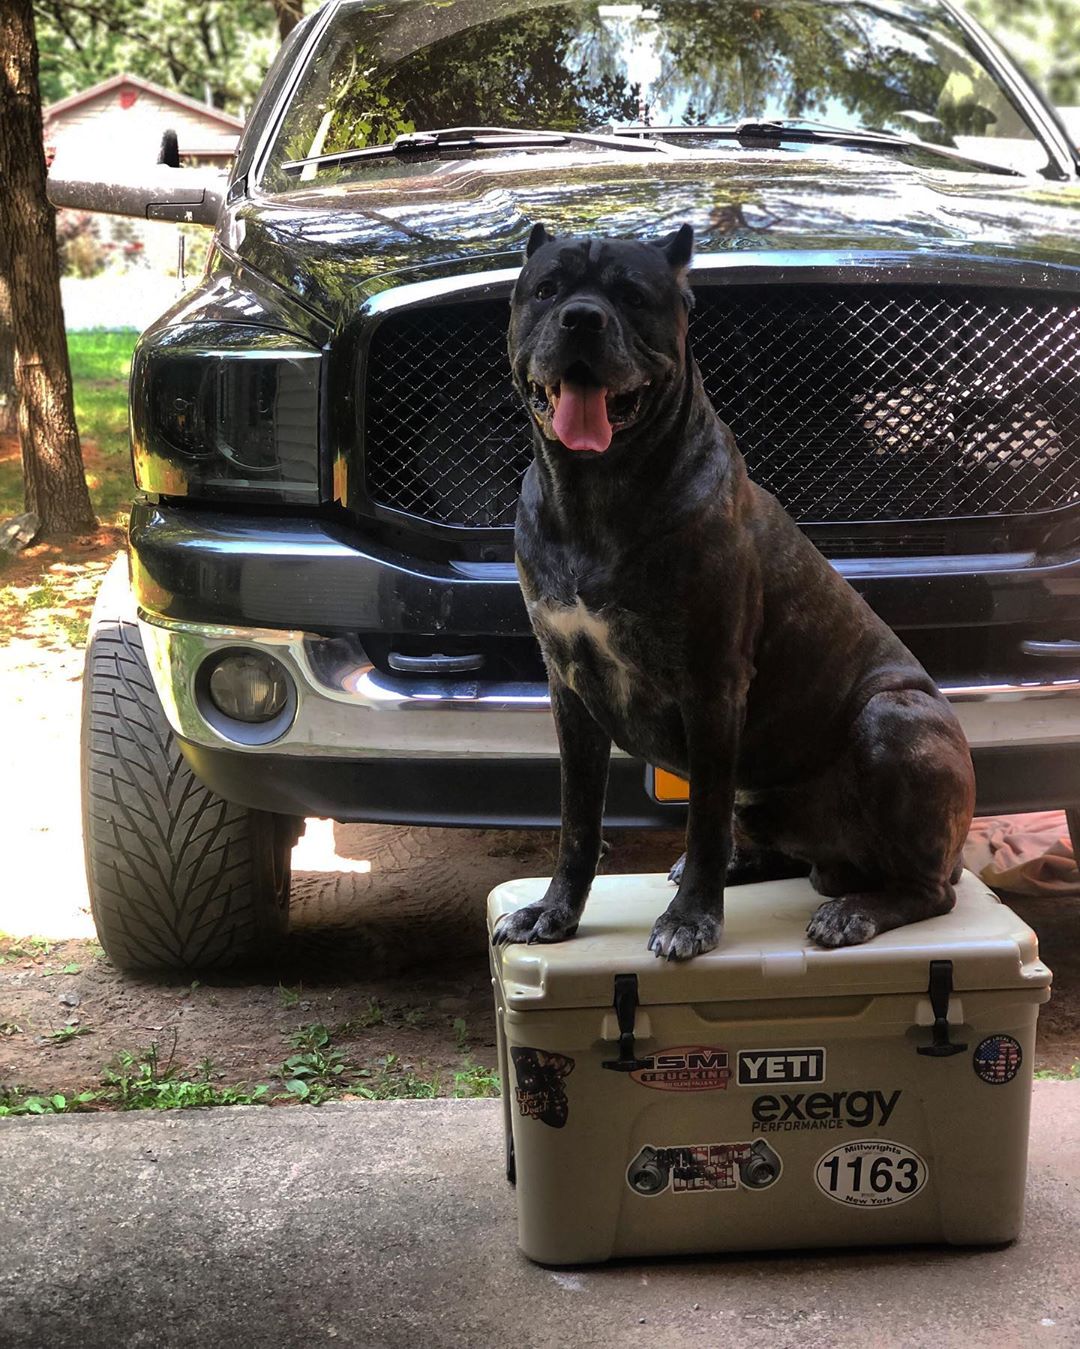 A Mastiff sitting on top of large box container in front of the parked car